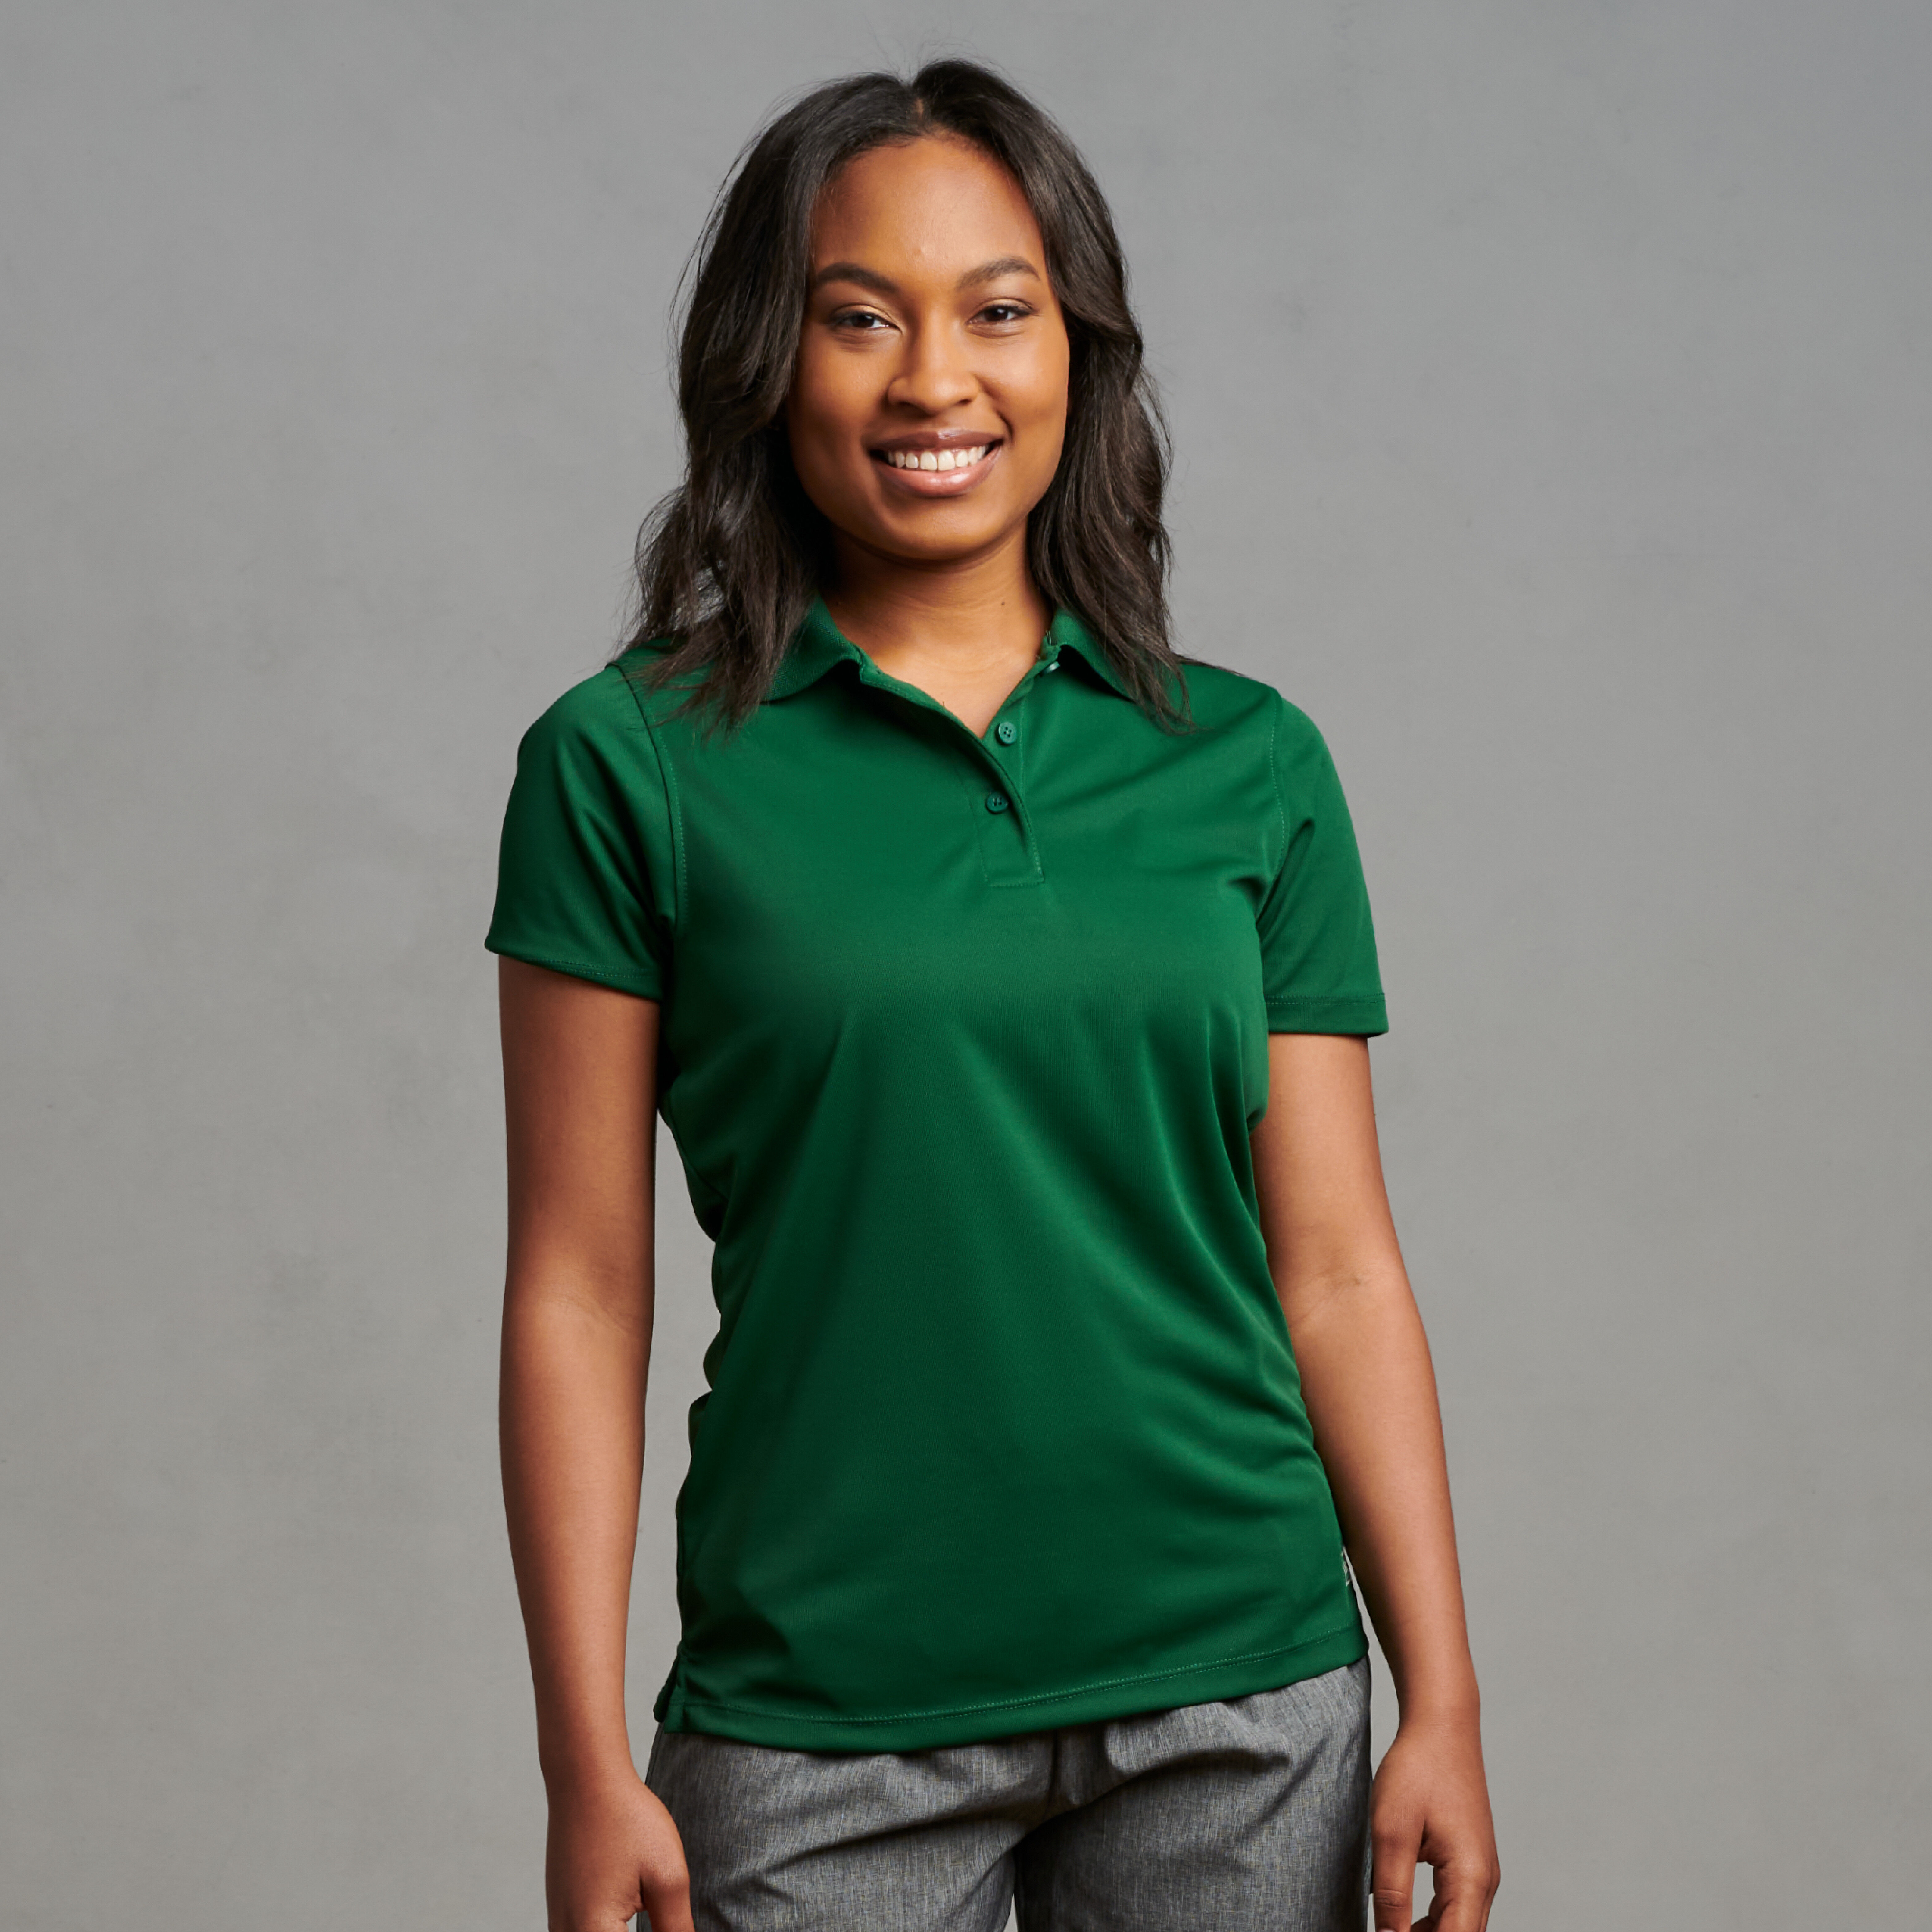 1er Pack Limited Sports Damen Lbw21161-120 Club Line Ladies Polo 